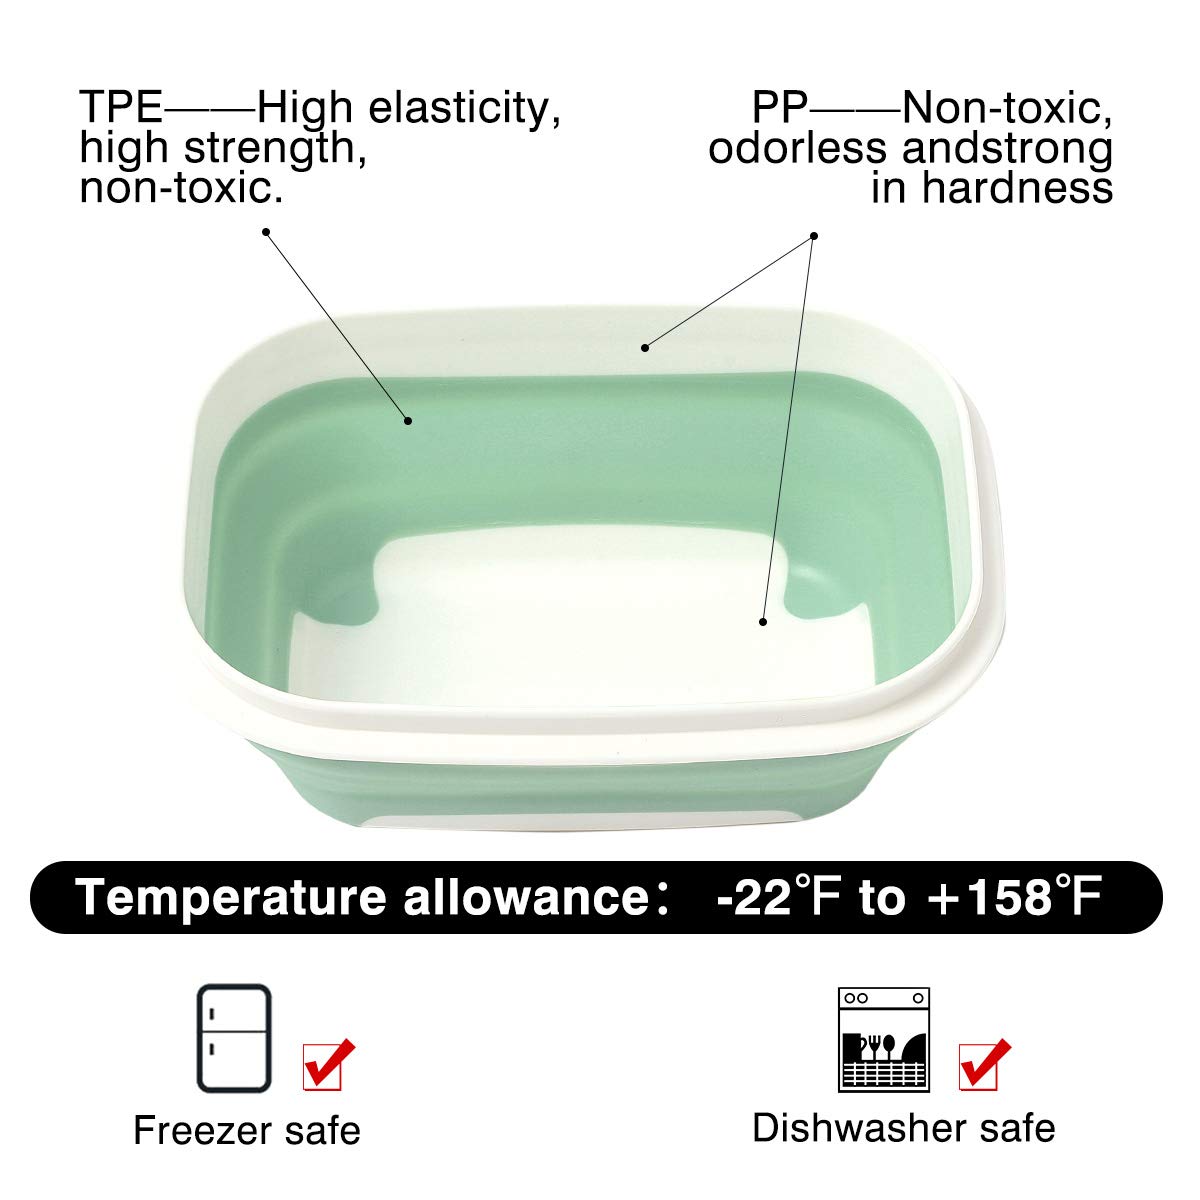 JIAJIBAO Collapsible Food Storage Containers for Kitchen - Space Saving - BPA Free fresh box, 3 Pack with Square+Round+Rectangle Insulated Reusable washable Lunch Containers